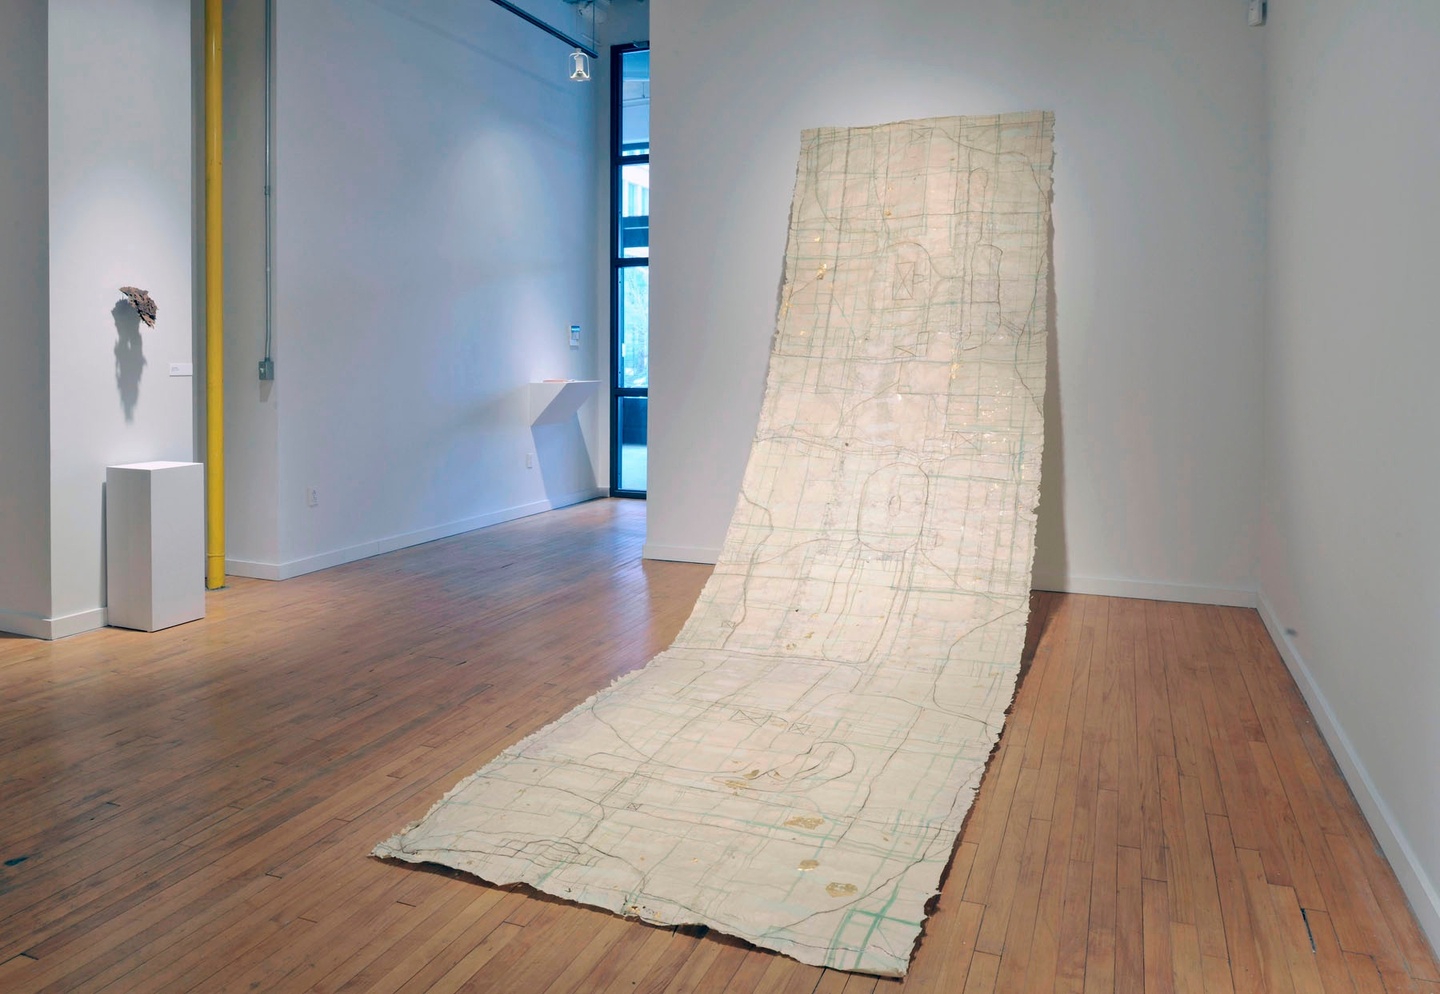 In a gallery space with white walls and light wooden floors, an installation: a rug/carpet hangs from the wall, extending to the foreground; it is white/cream-colored, its surface stitched/adorned with lines that thread across the length of the material.